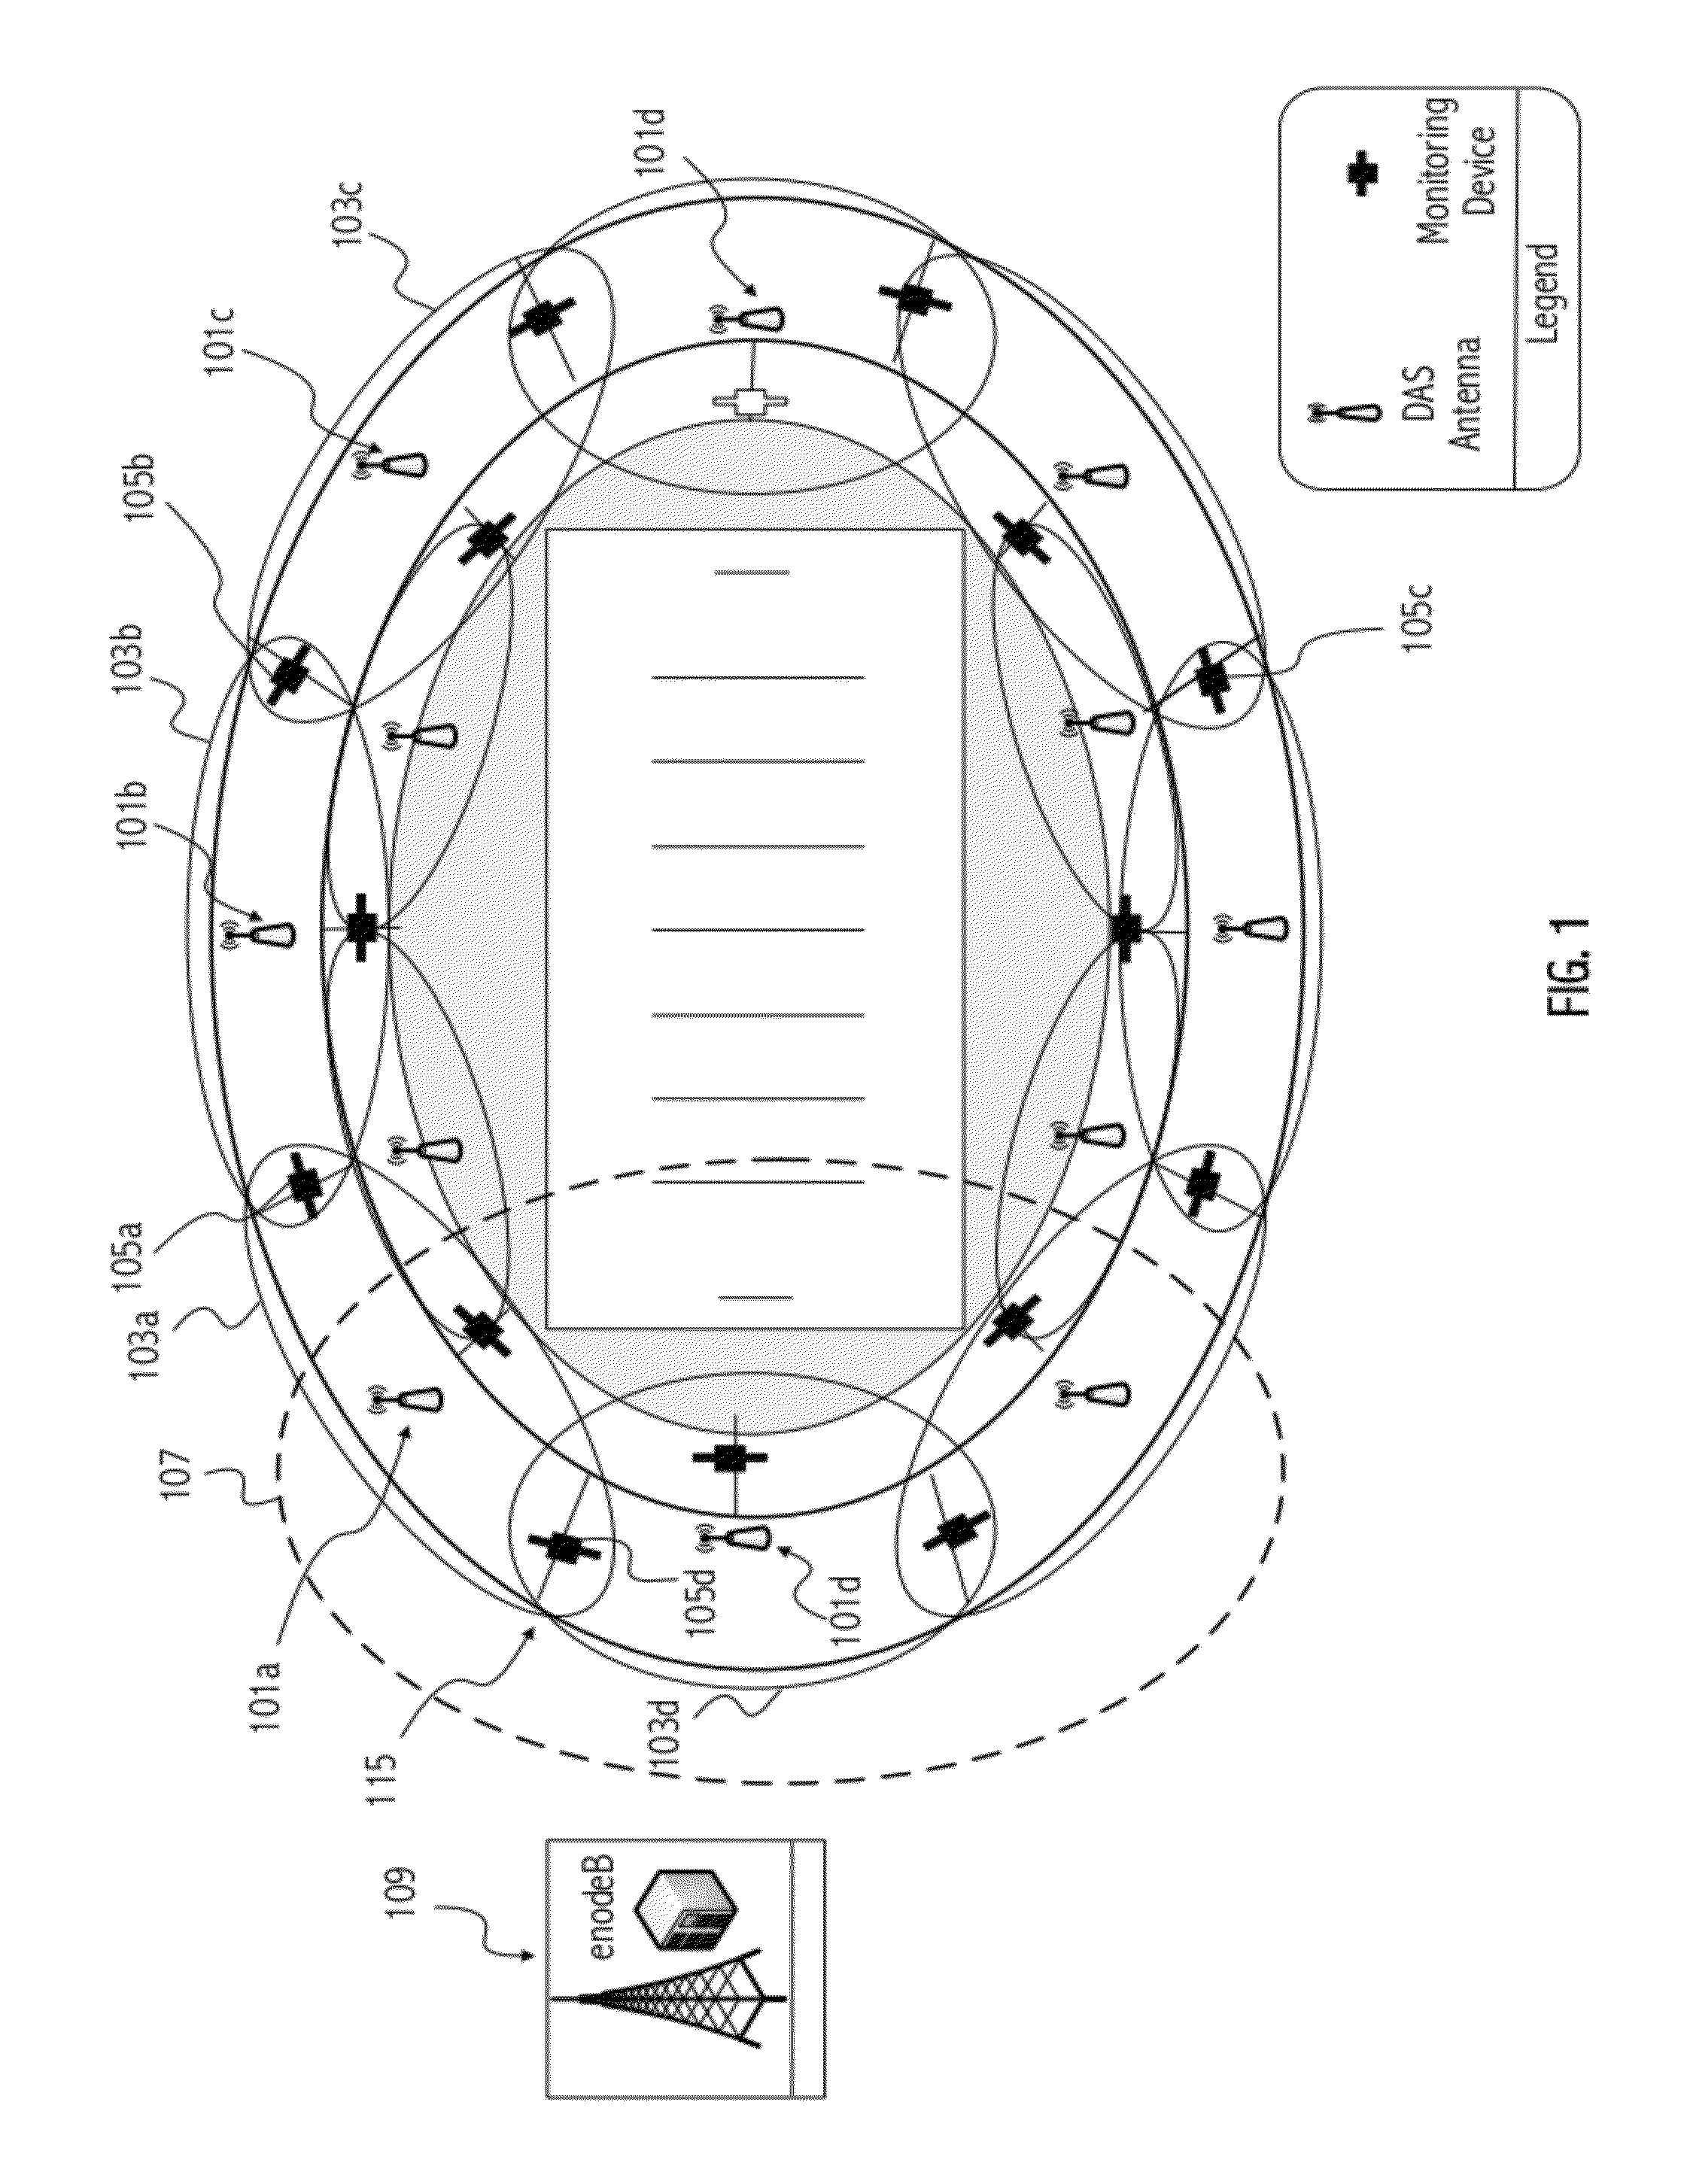 Monitoring system for distributed antenna systems